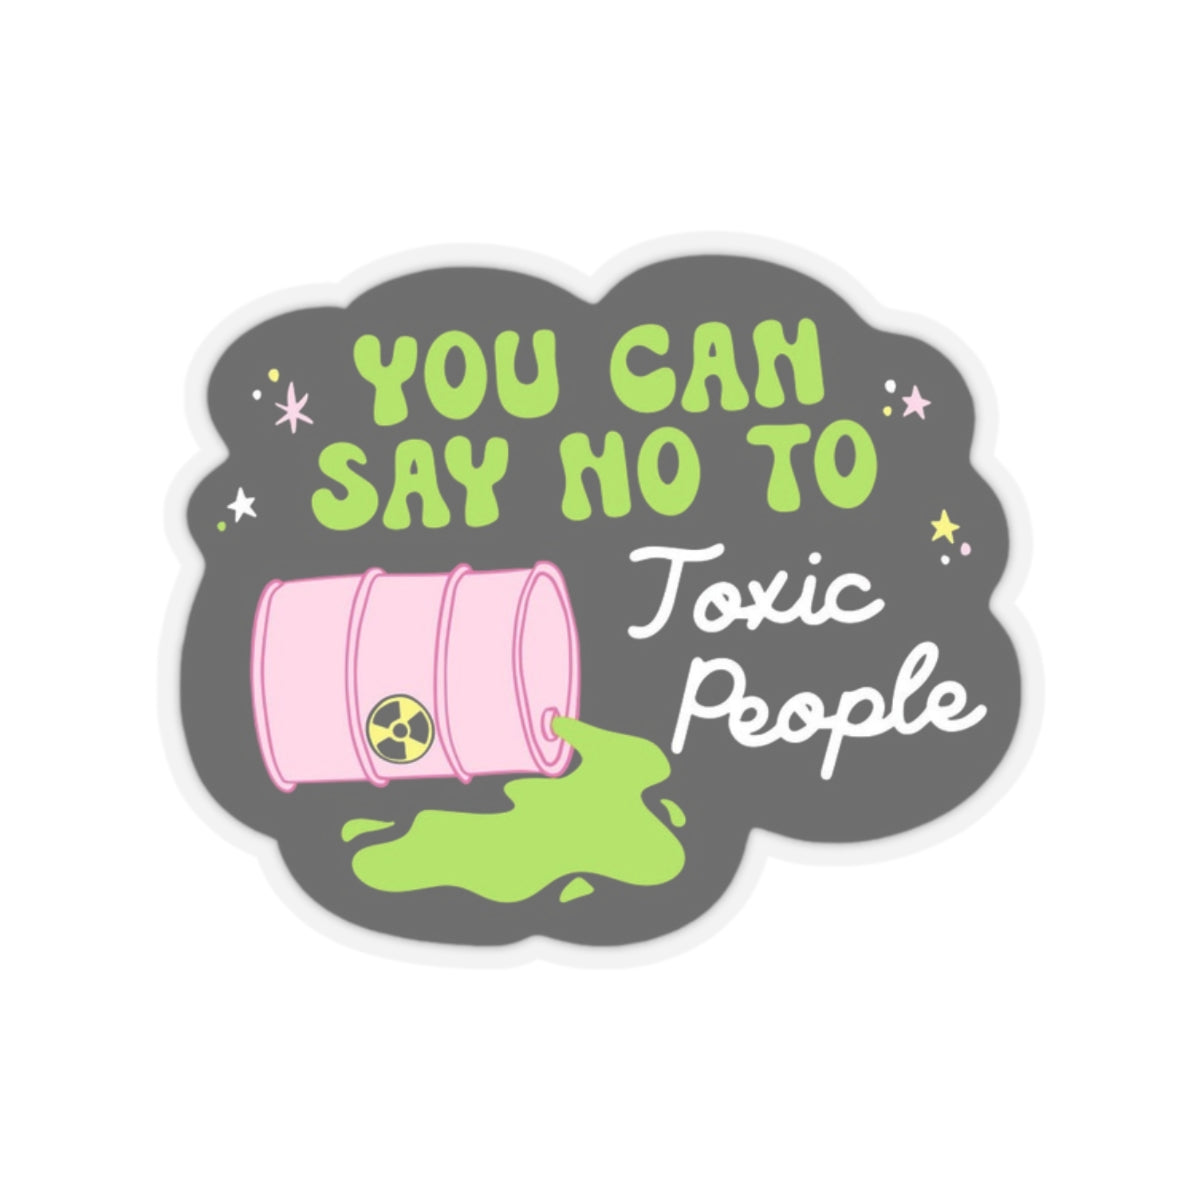 No to toxic people Sticker